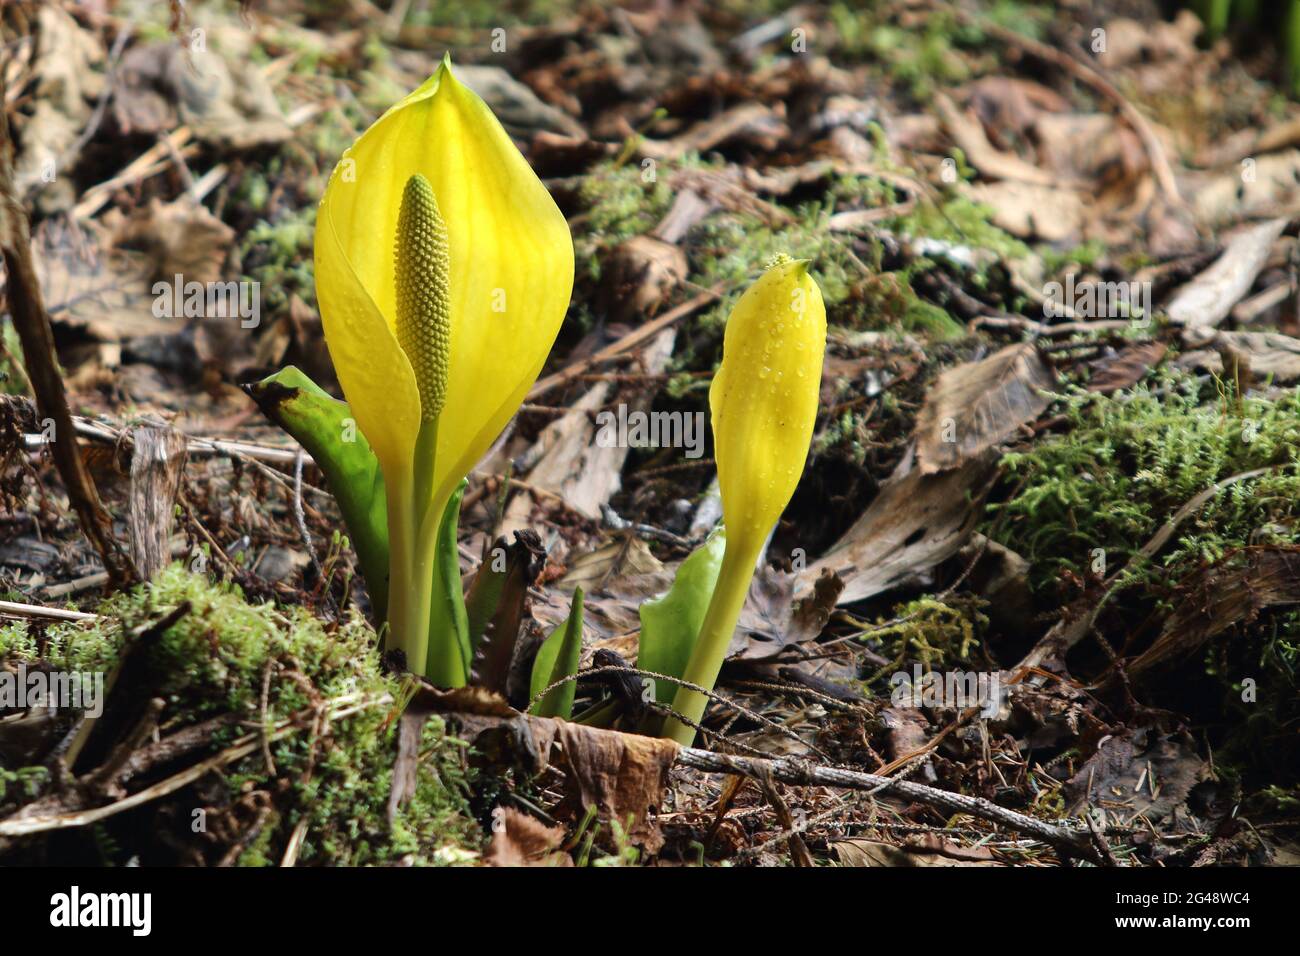 The vivid yellow blossoms and unusual shape of mature Skunk Cabbage Plants in full bloom create a bright spot in the soggy woodlands Stock Photo